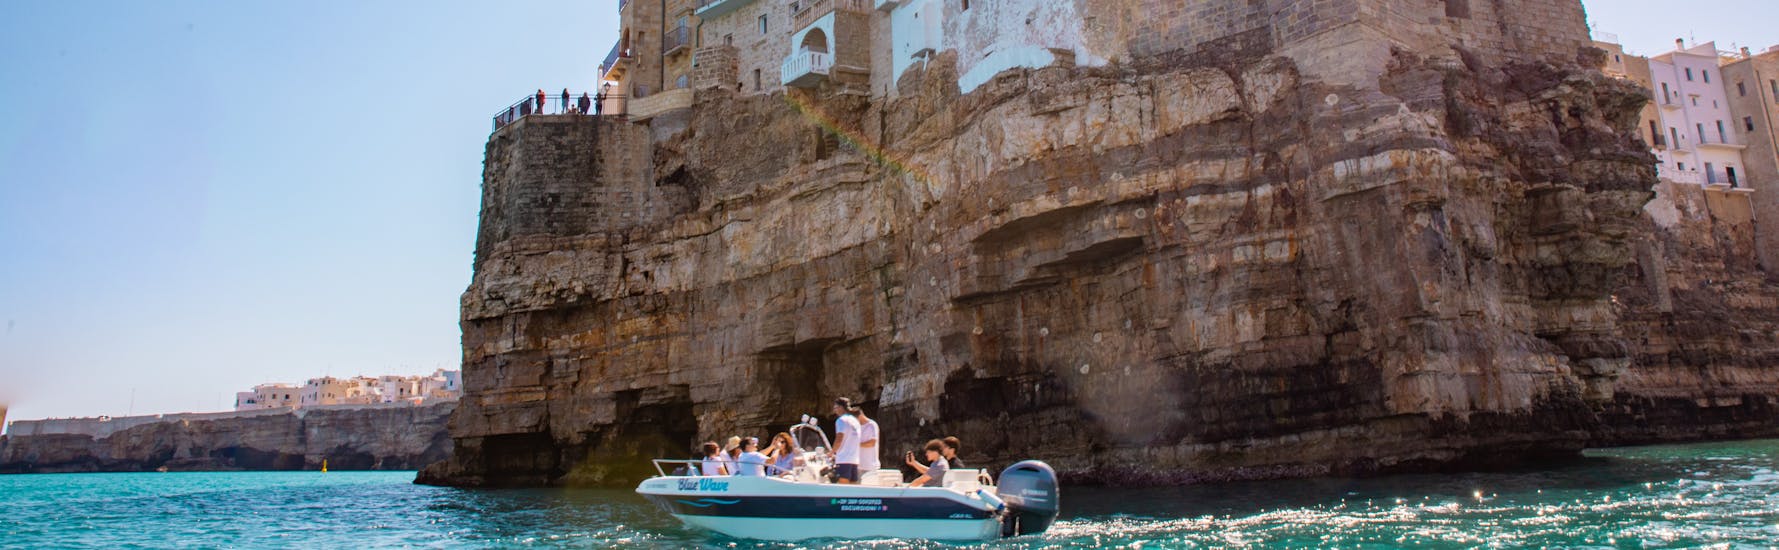 The blue wave boat that skirts Polignano a Mare during the Private Boat Trip to Polignano a Mare Caves with Apéritif with Blue Wave.